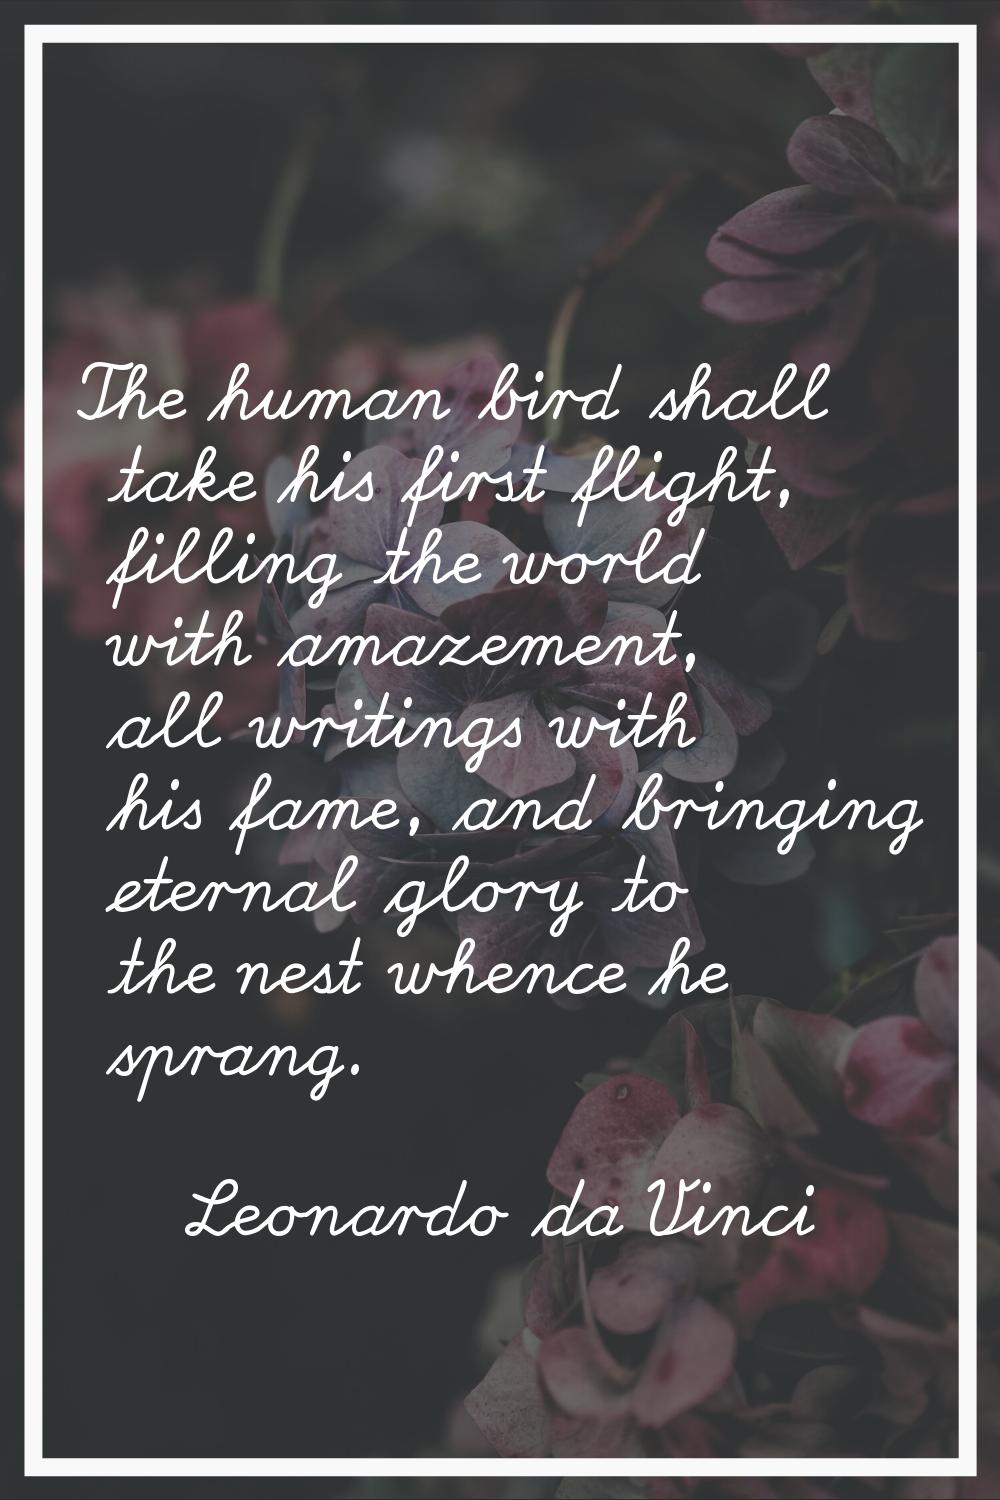 The human bird shall take his first flight, filling the world with amazement, all writings with his